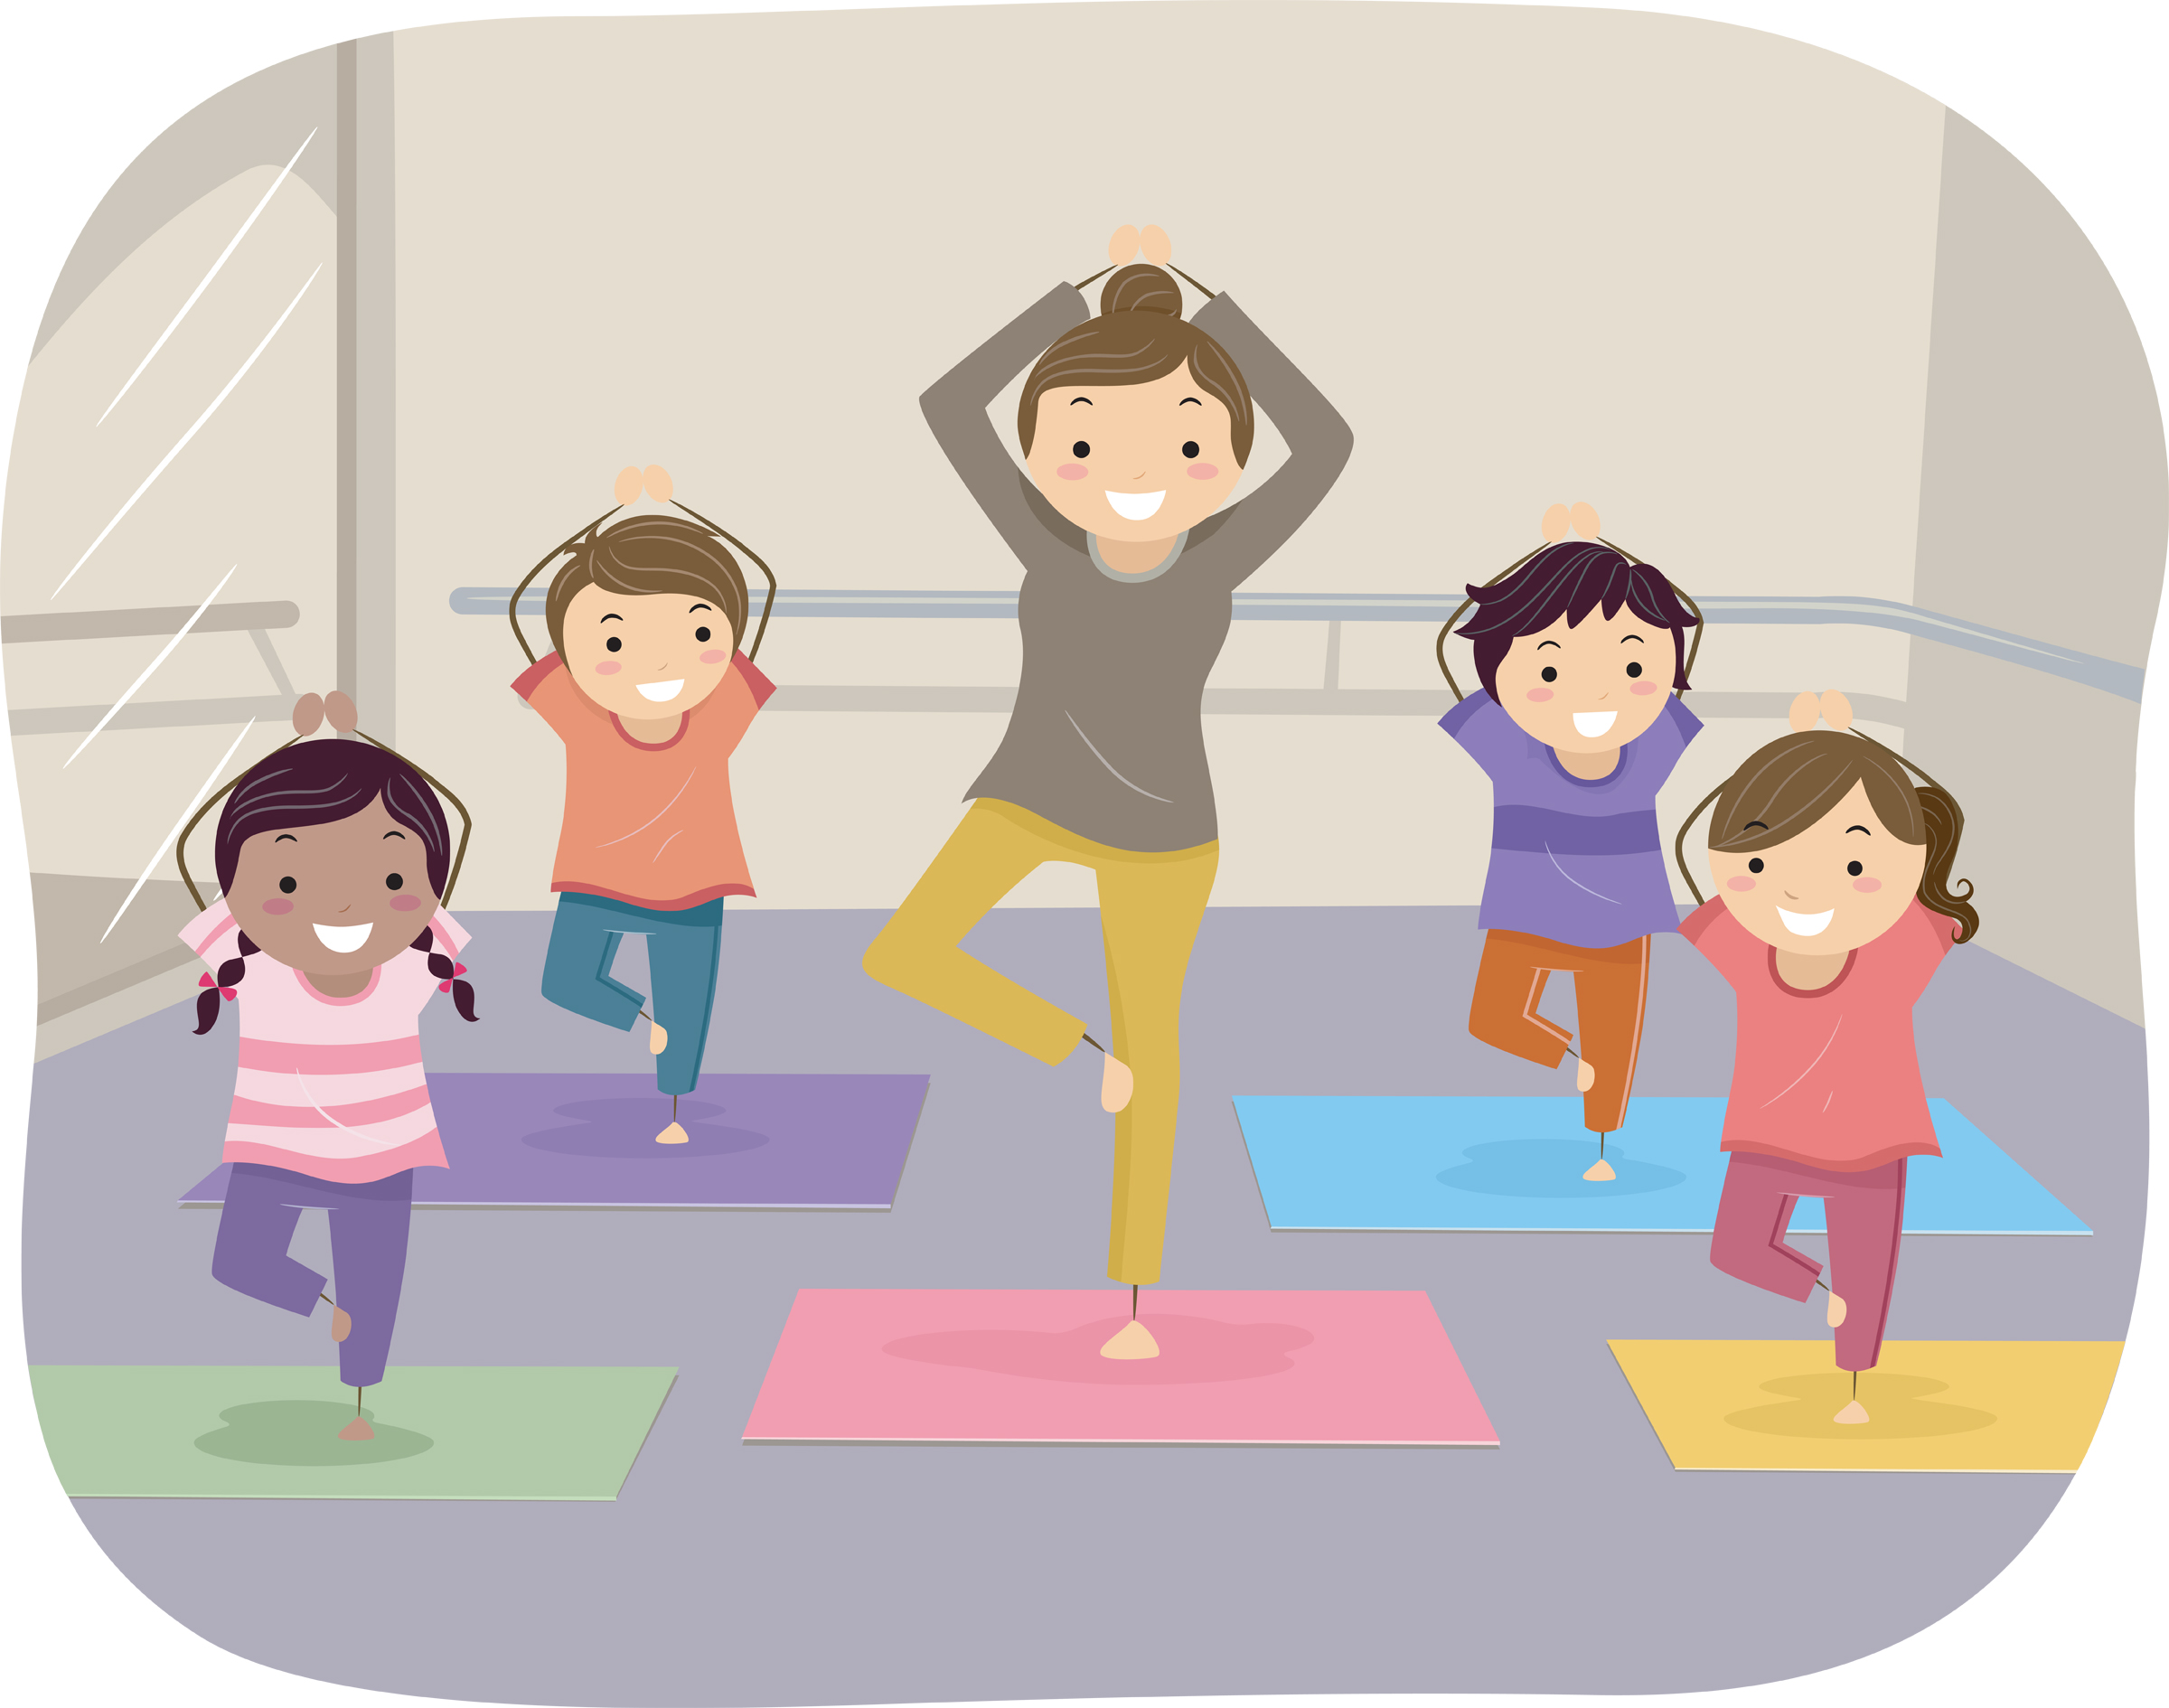 Children doing yoga with an instructor in the middle.